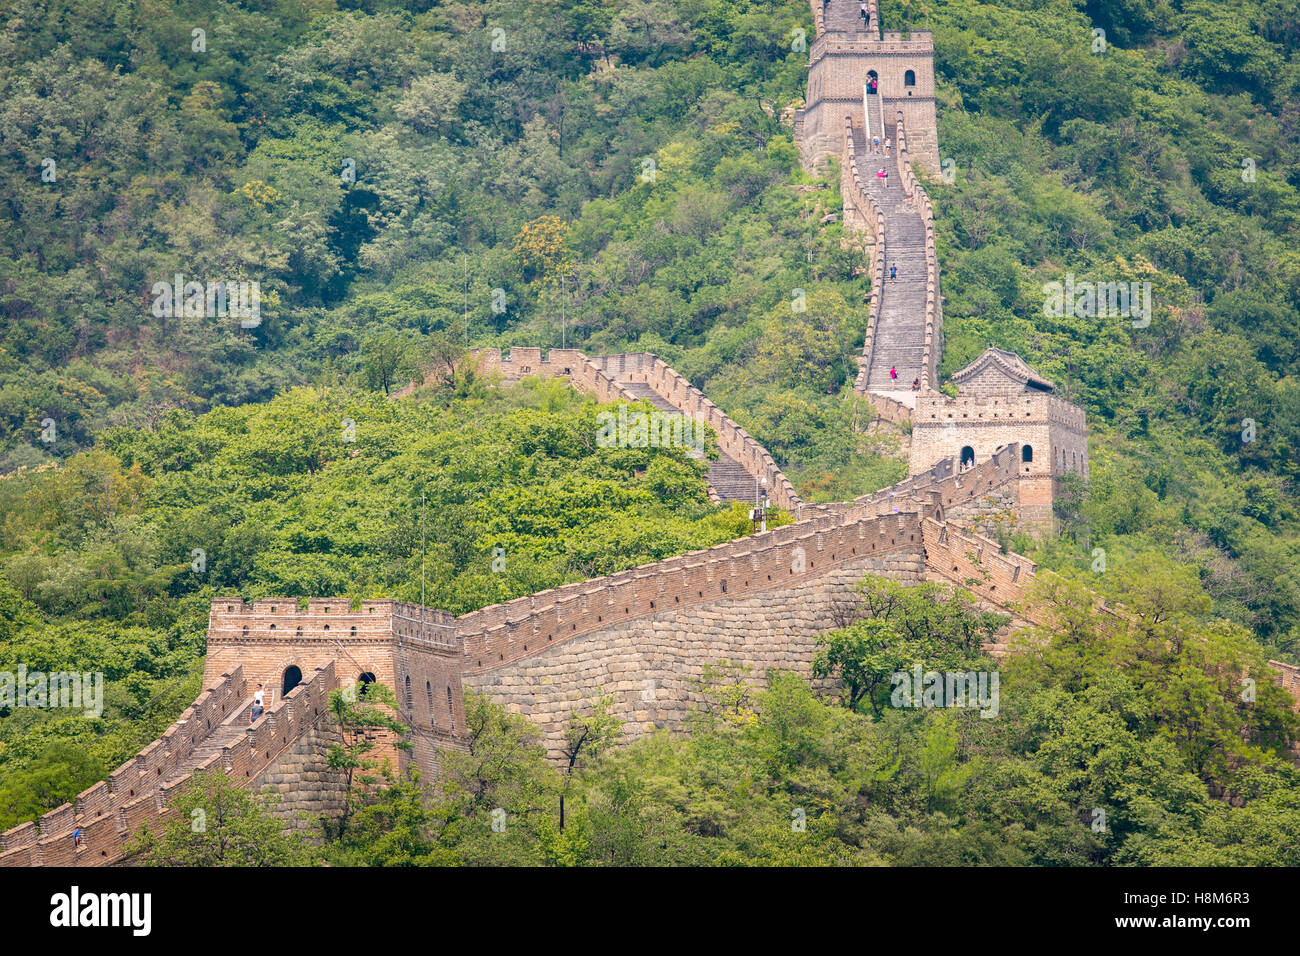 Mutianyu, China - Landscape view of the Great Wall of China. The wall stretches over 6,000 mountainous kilometers east to west a Stock Photo